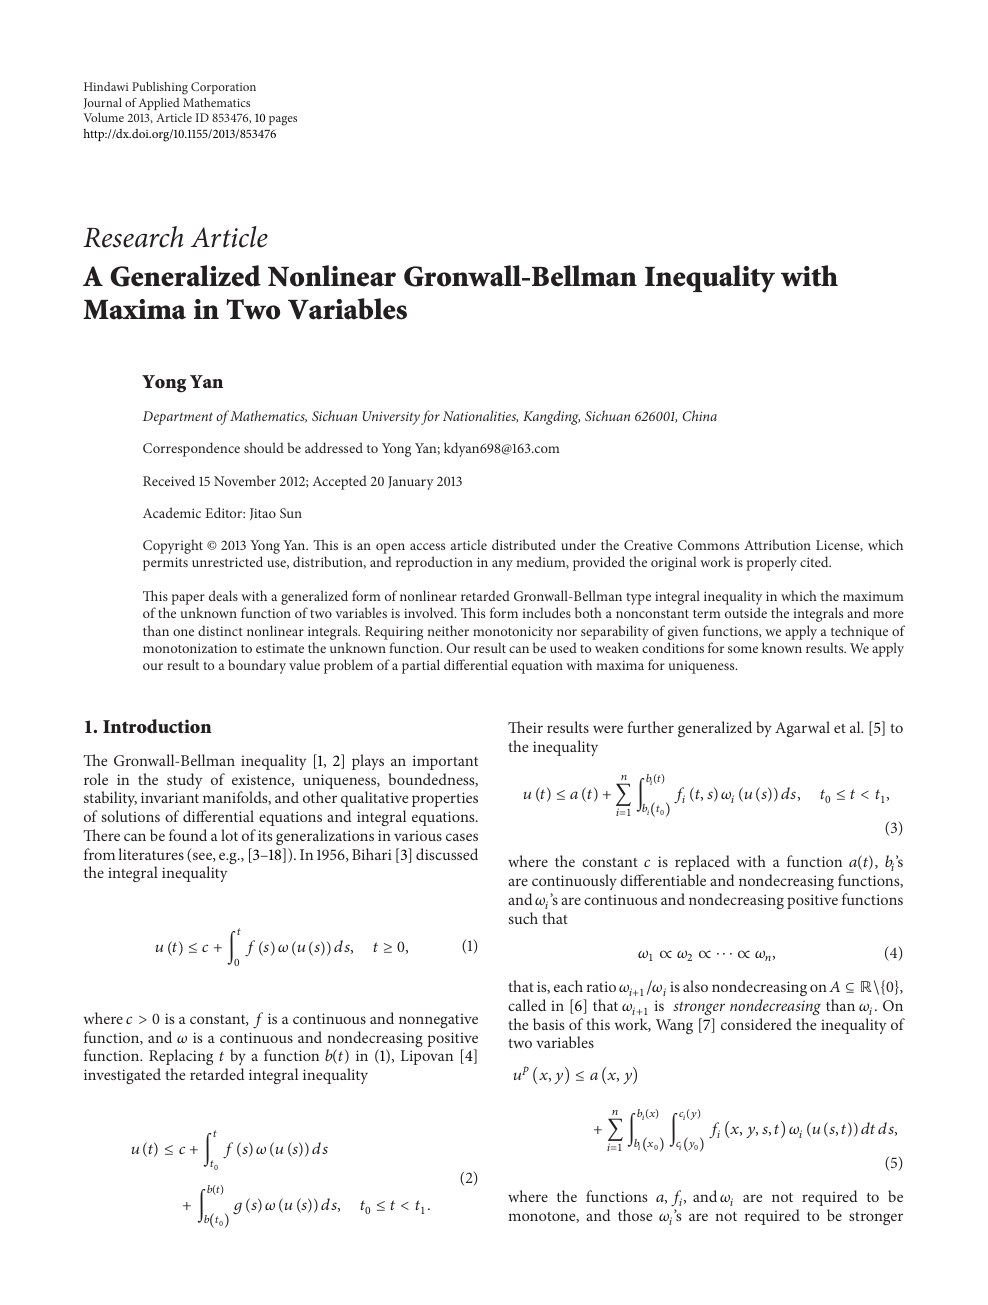 A Generalized Nonlinear Gronwall Bellman Inequality With Maxima In Two Variables Topic Of Research Paper In Mathematics Download Scholarly Article Pdf And Read For Free On Cyberleninka Open Science Hub